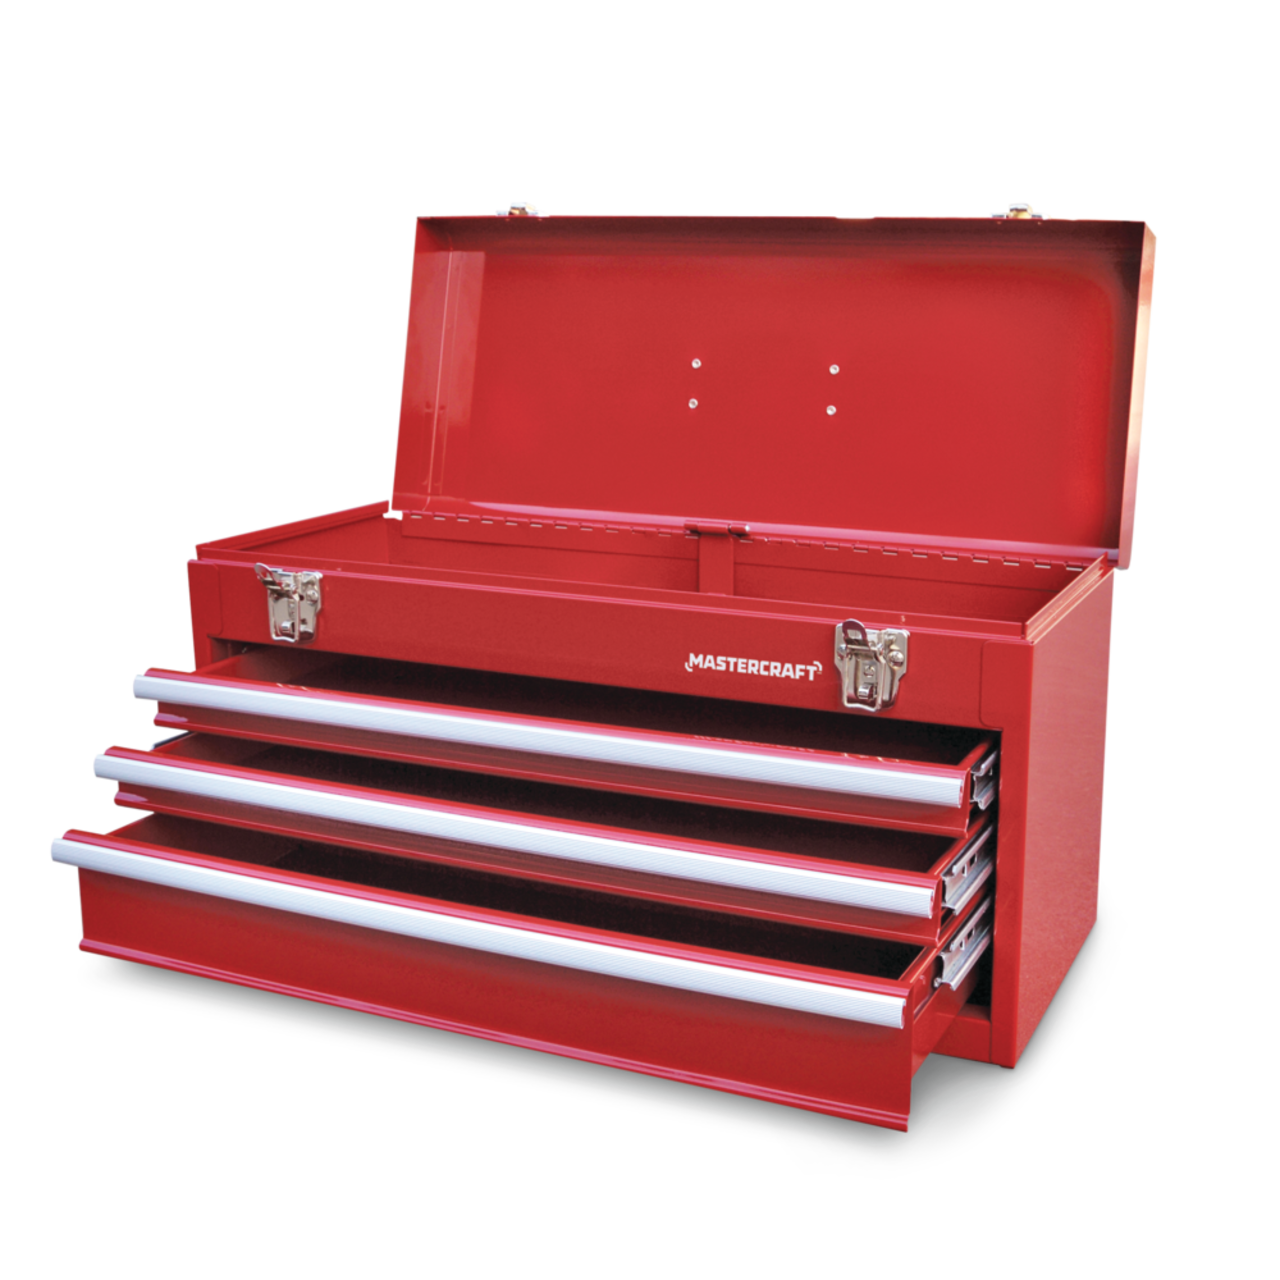 20 In. 3-Drawer Small Metal Portable Tool Box with Drawers and Tray